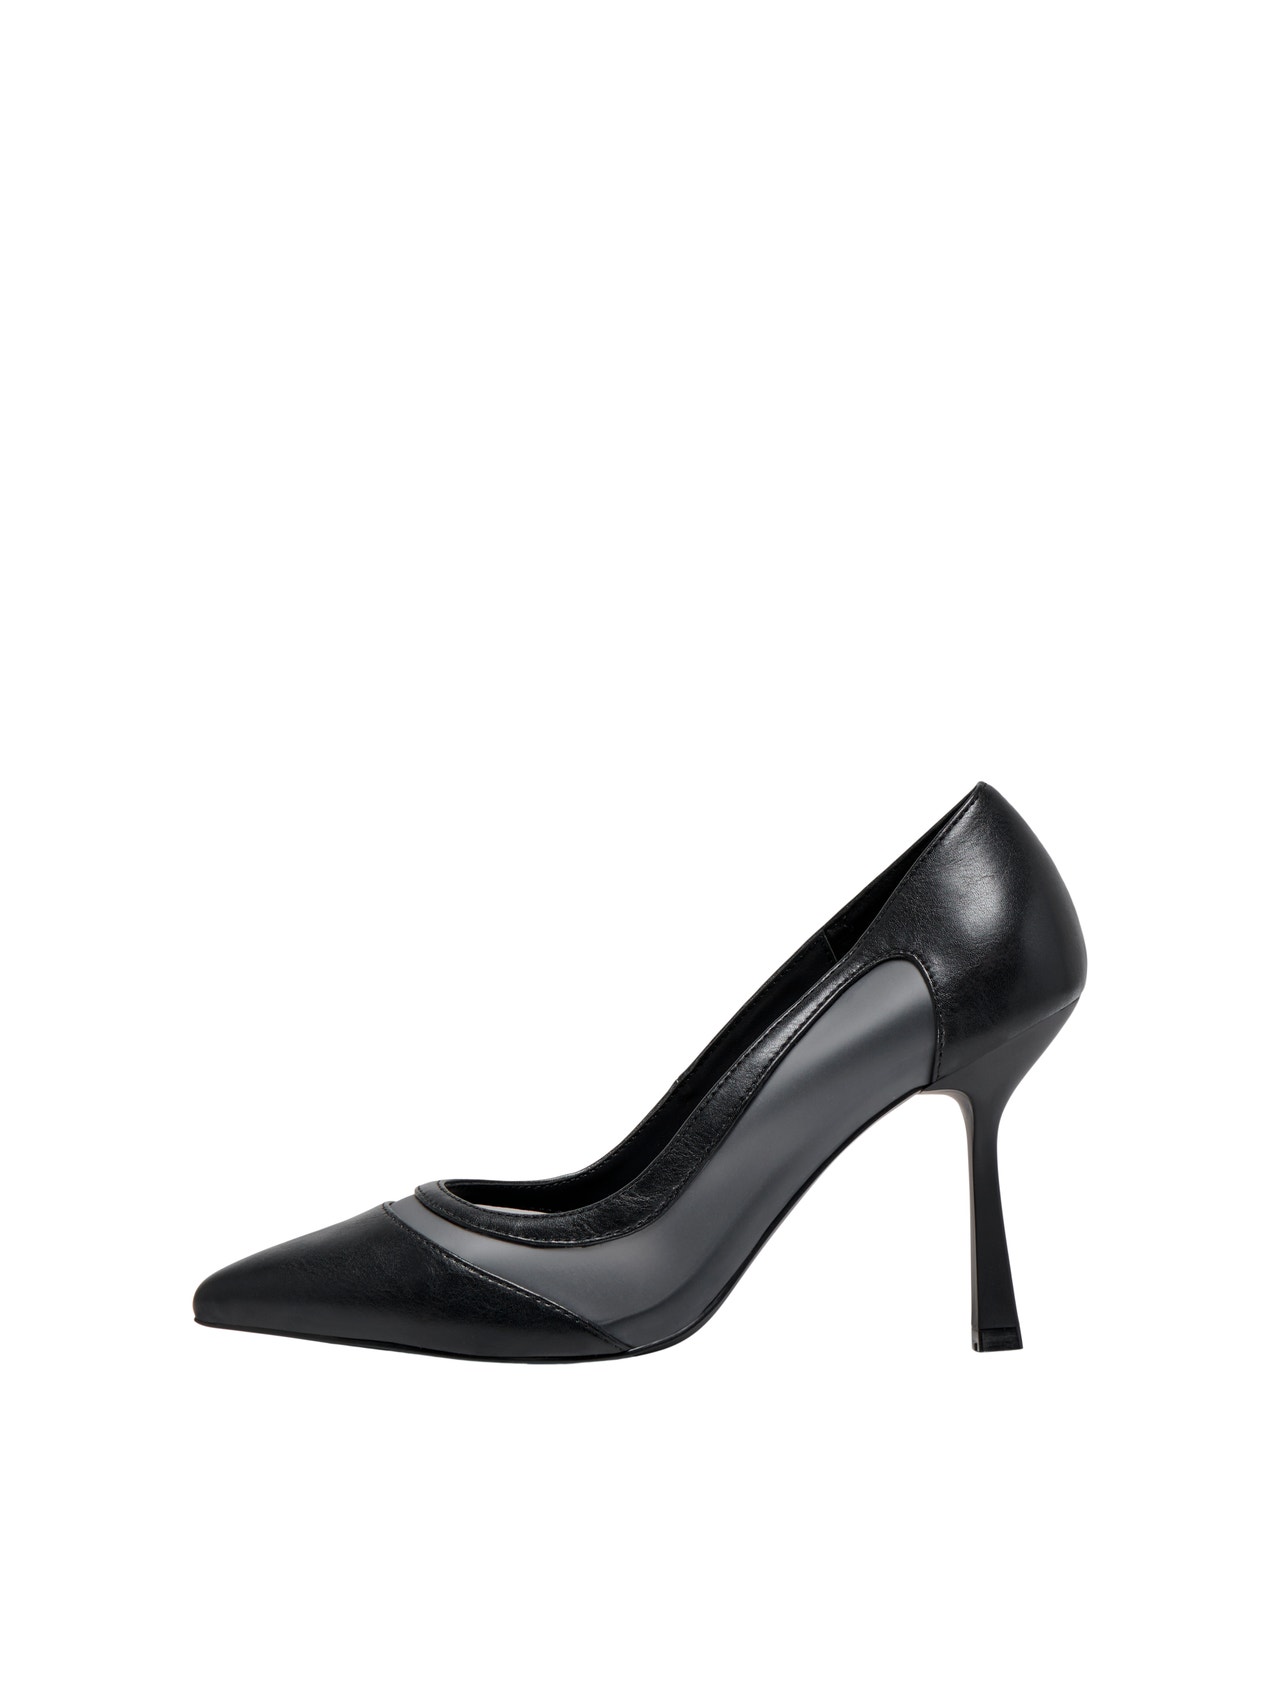 ONLY Stilettos with pointed toe -Black - 15304322